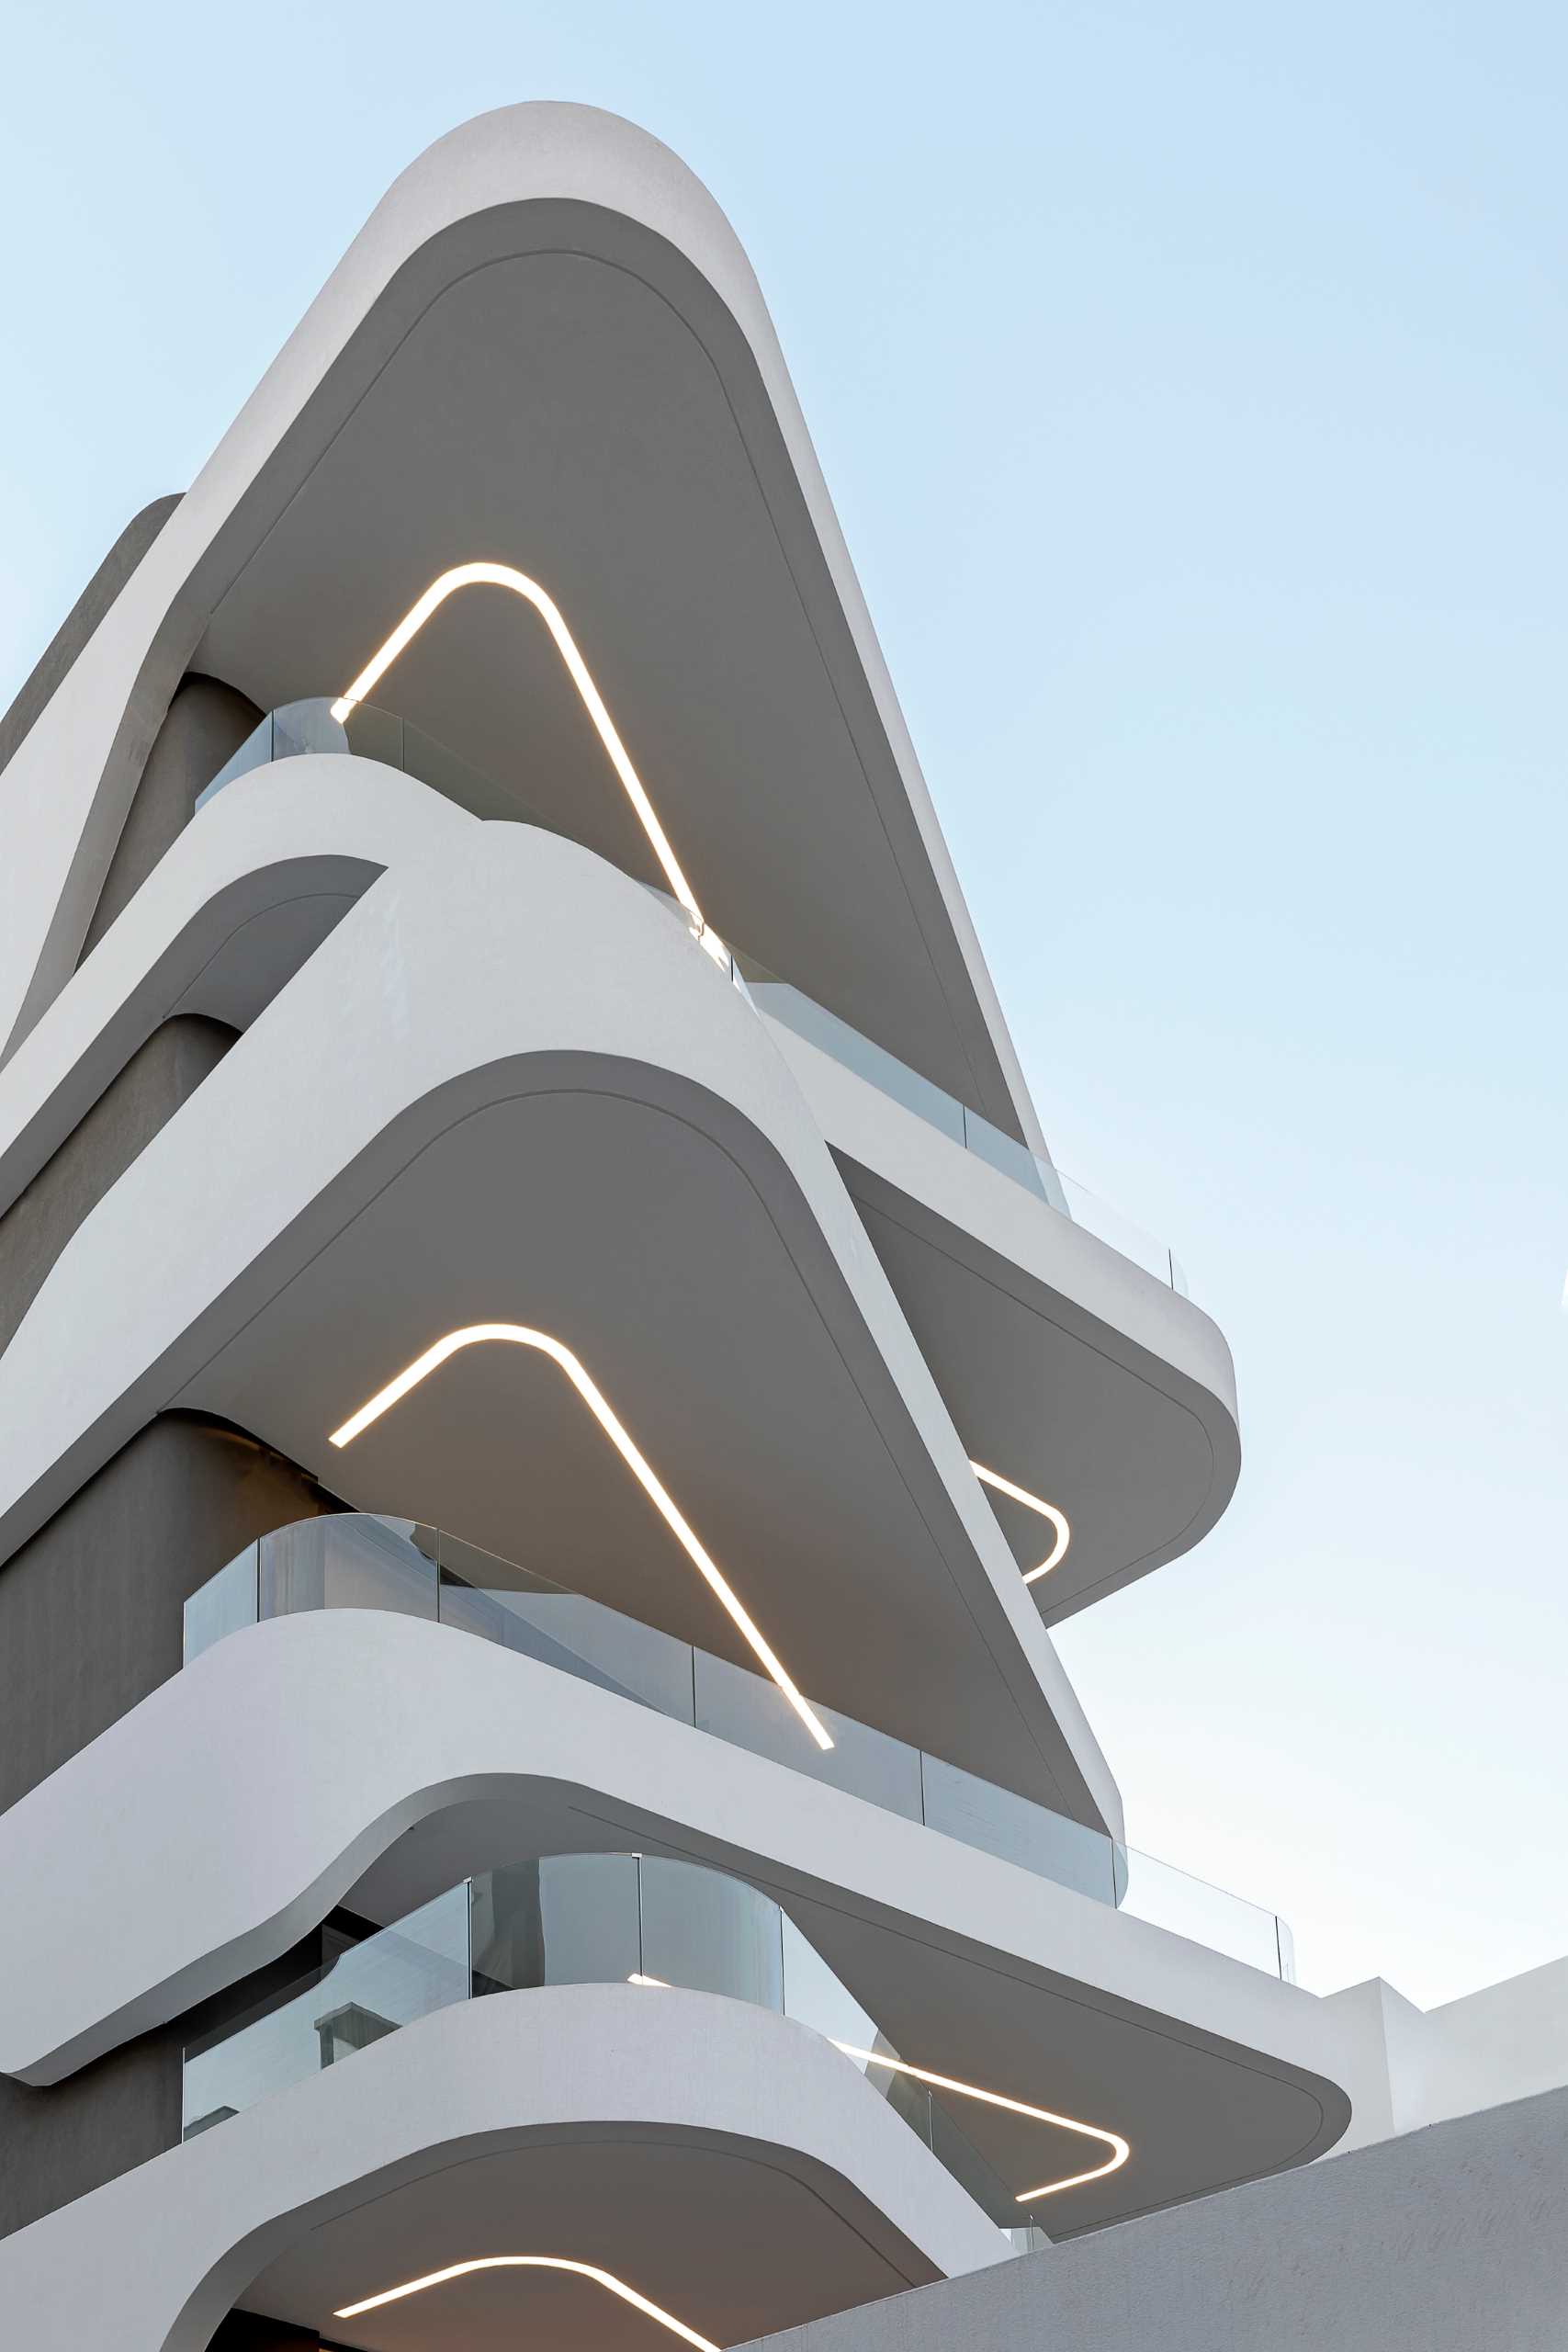 Key to the design of this modern apartment building are the curvilinear balconies that alternate directions creating a lively facade.